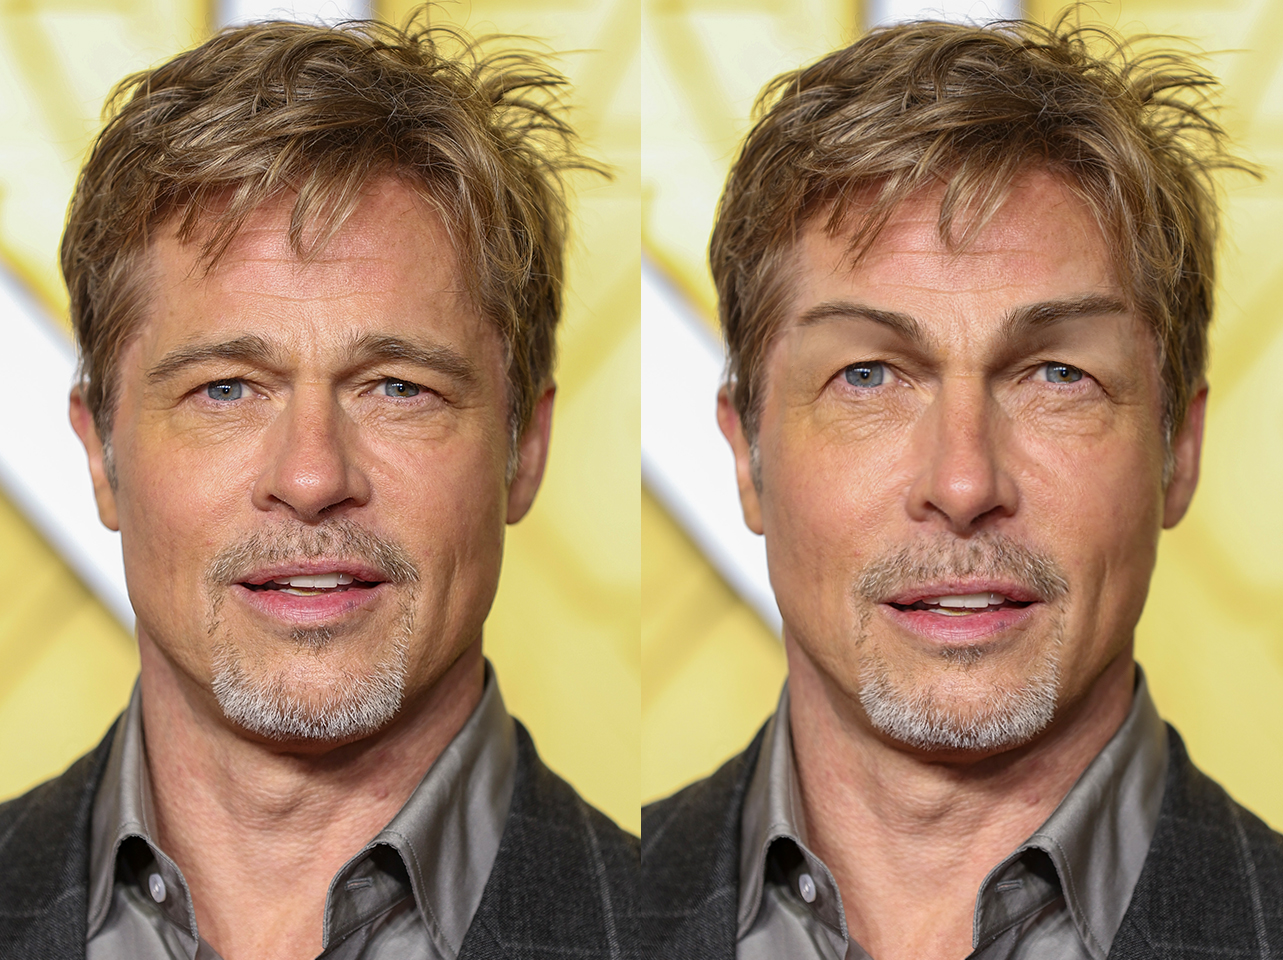 The real Brad Pitt vs Ideal self | Source: Getty Images